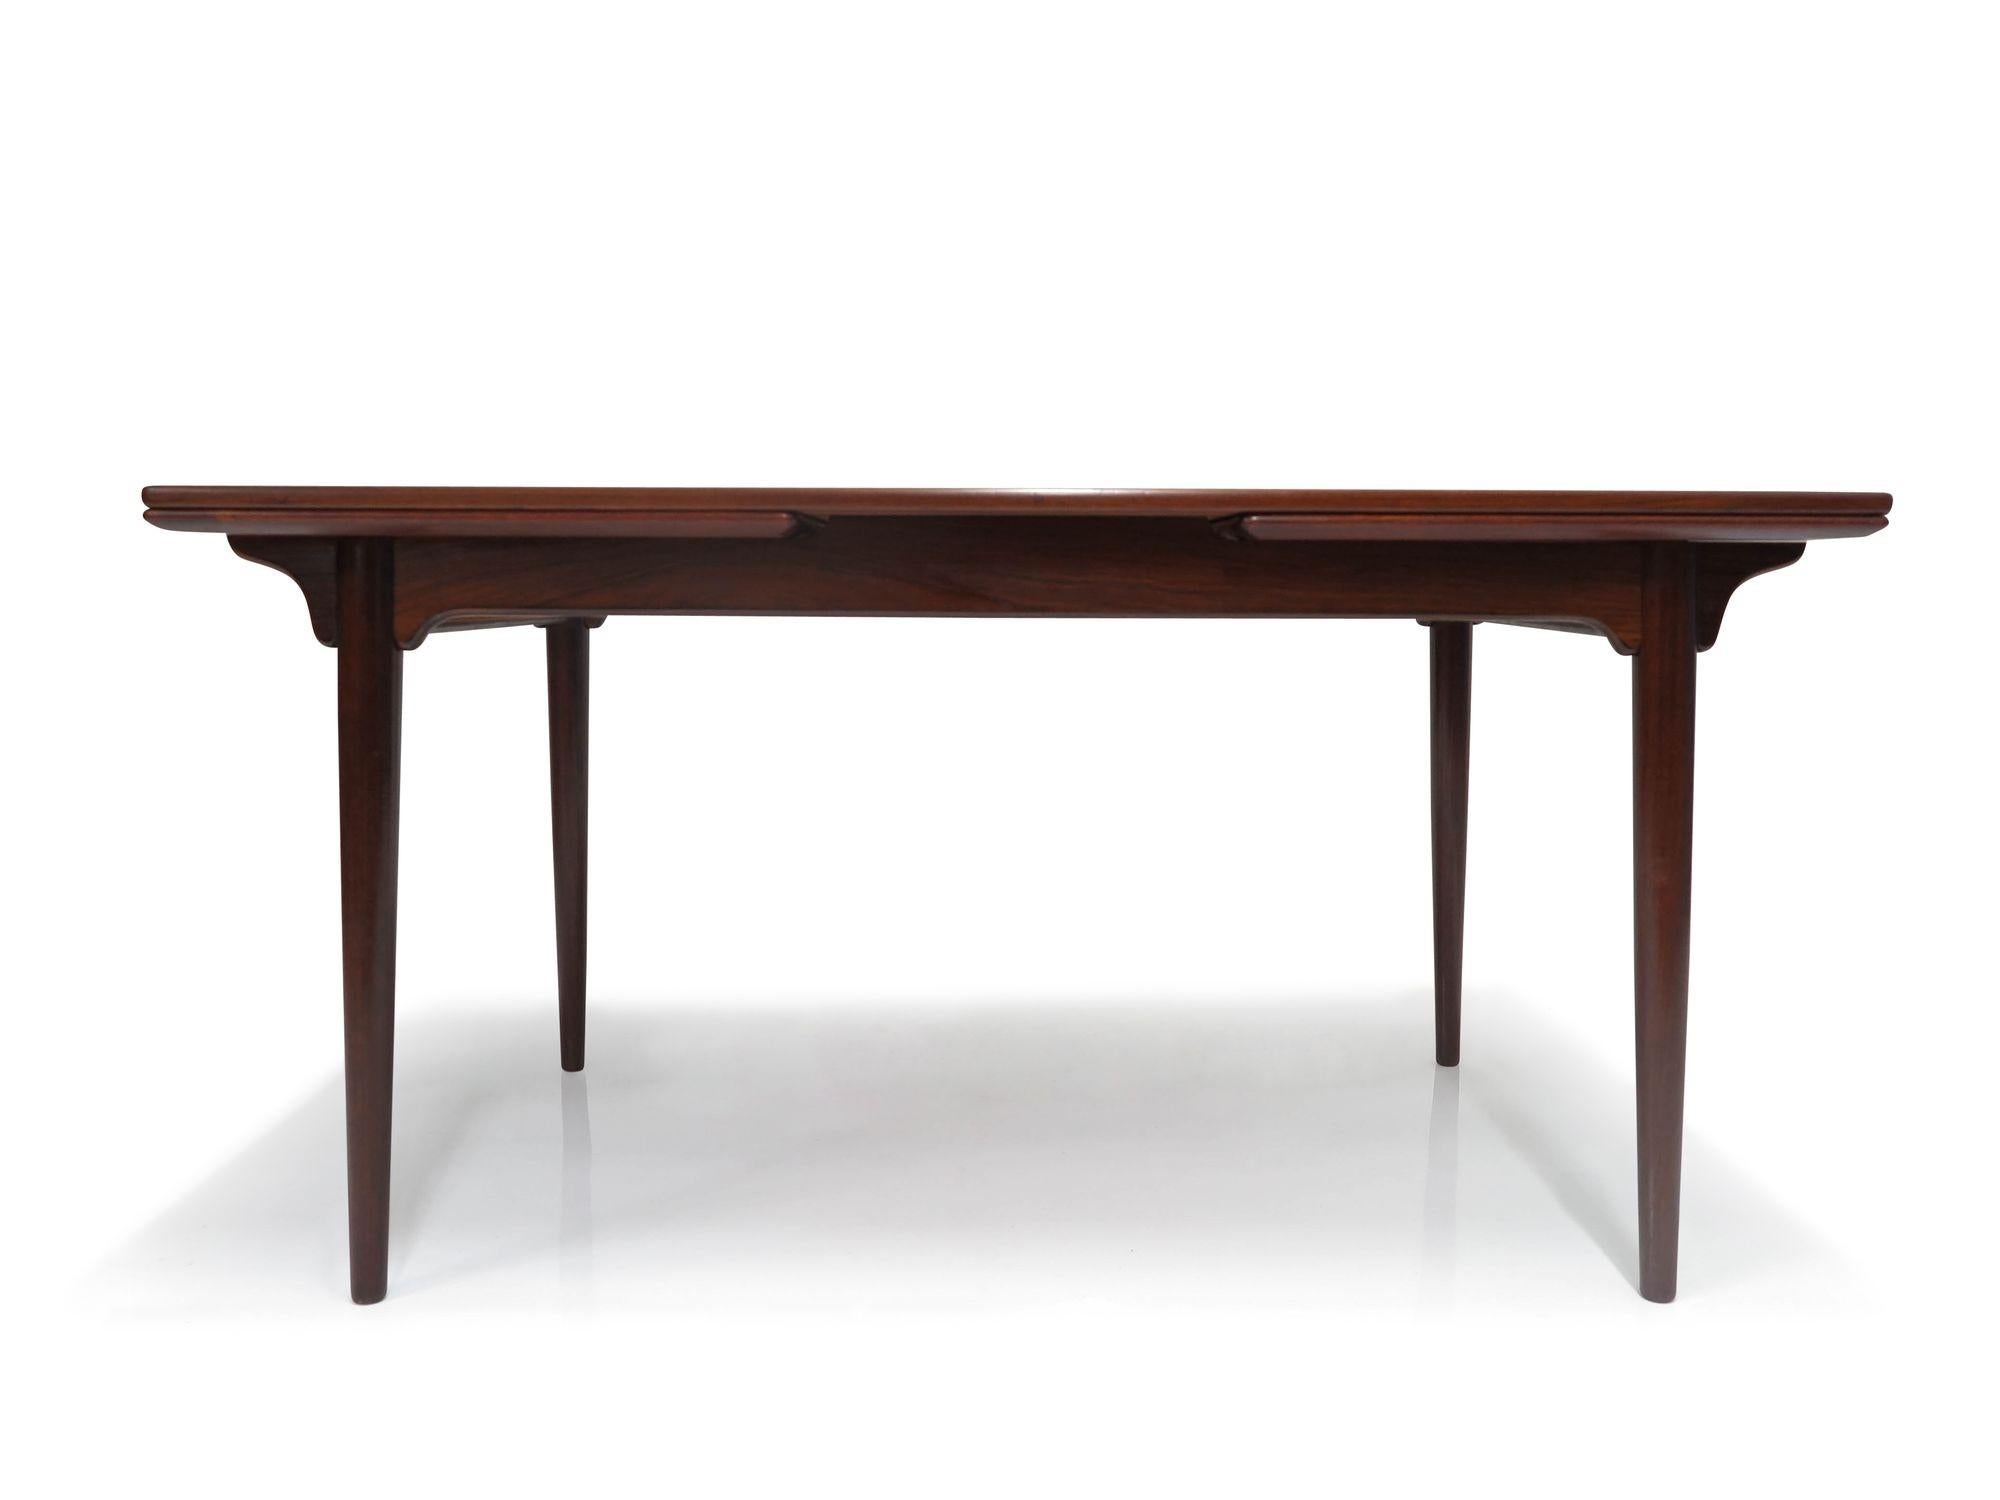 Danish Rosewood dining table, designed by Gunni Omann for Omann Jun Mobelfabrik, circa 1960, Denmark, Model 54. This table boasts a stunning book-matched grain on the top surface, edged in solid rosewood. It comfortably seats six when closed and